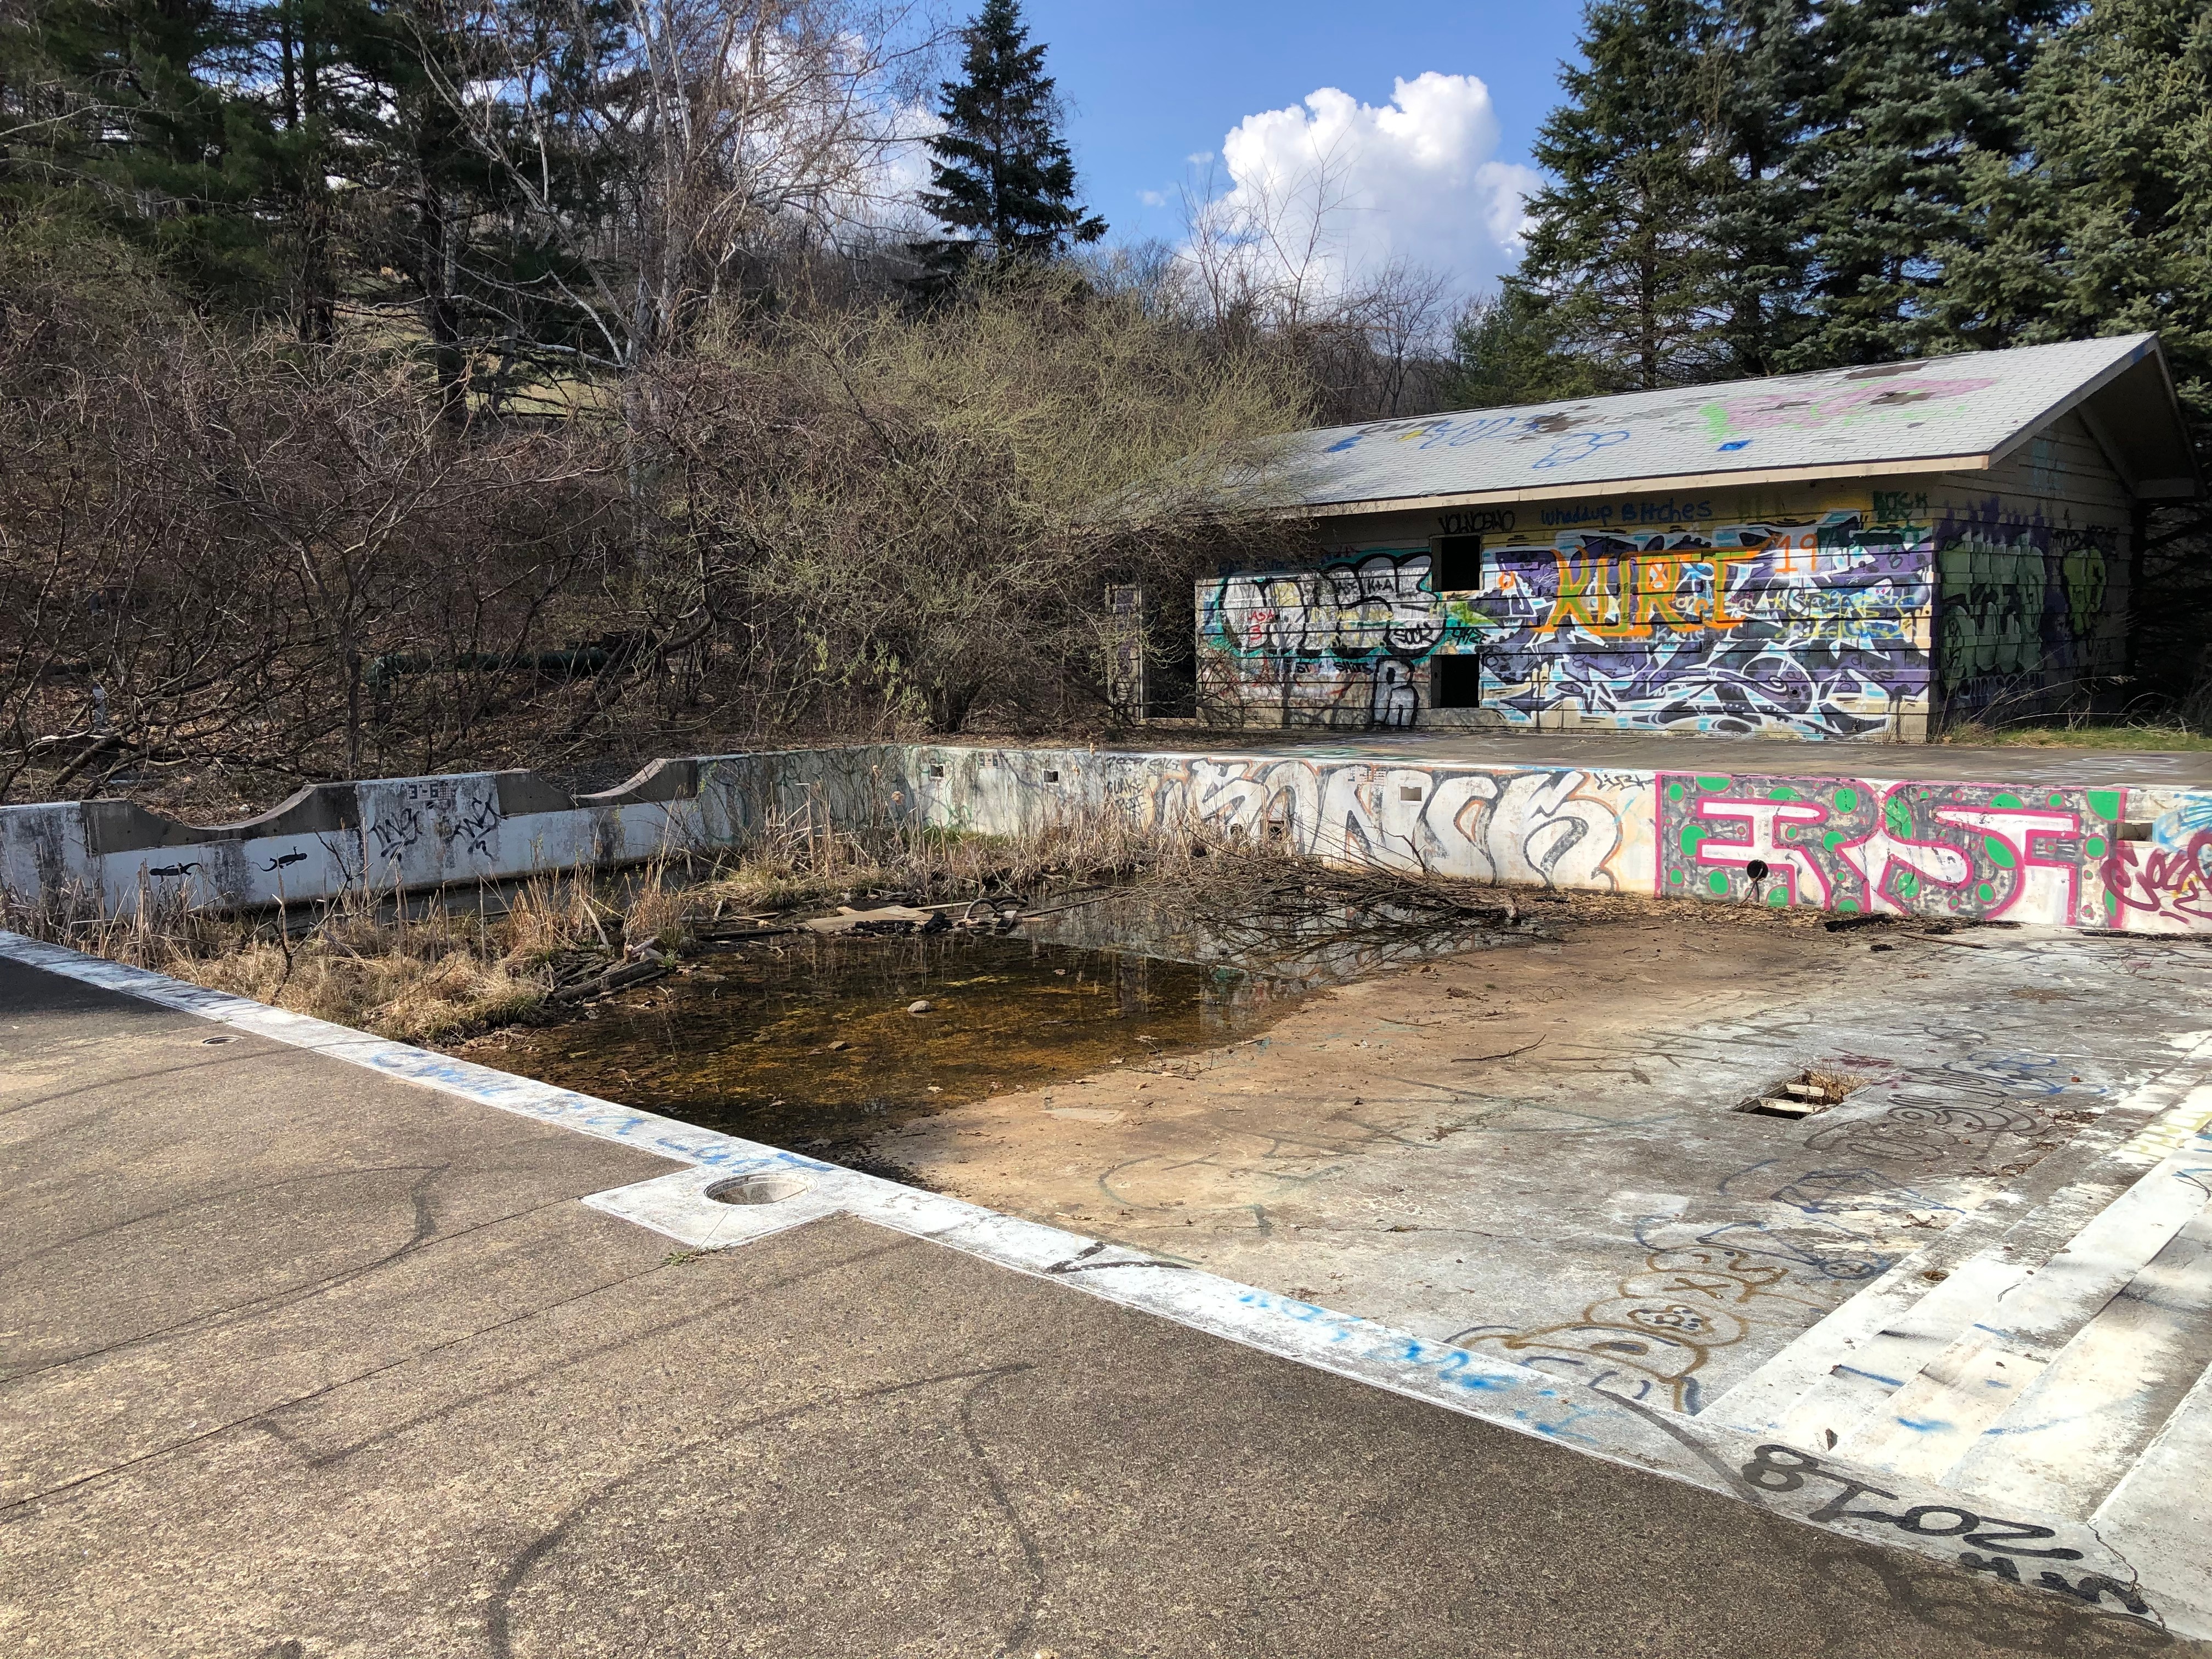 Site of the former Mt. Tom Ski Area's water slide. Abandoned for 22 years, it has standing water and is covered with graffiti.